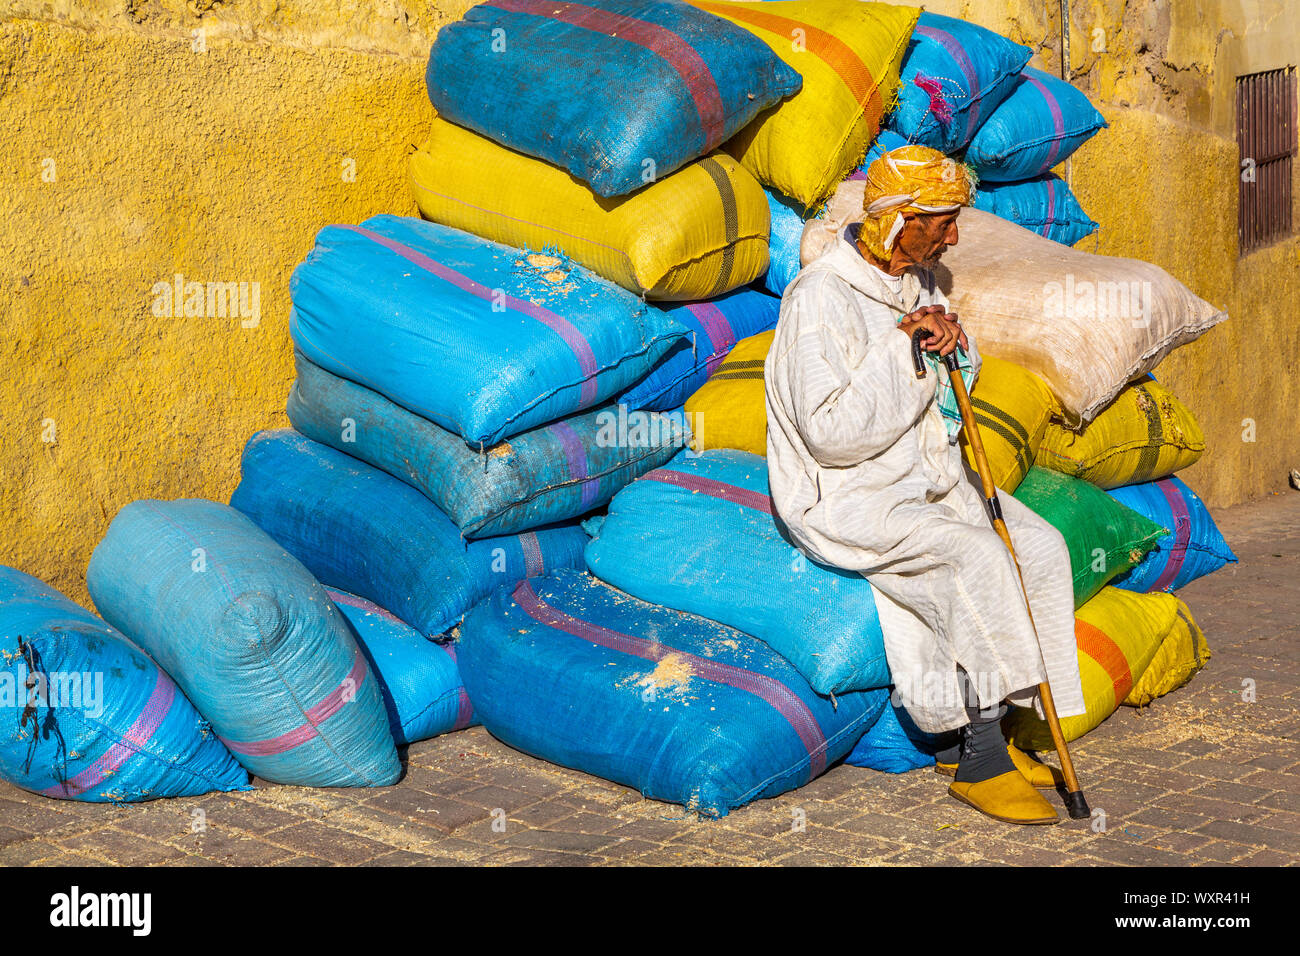 Elderly traditionally dressed Moroccan man with walking stick sitting on colourful plastic bales of food ingredients by yellow wall, Marrakech, Morocco Stock Photo